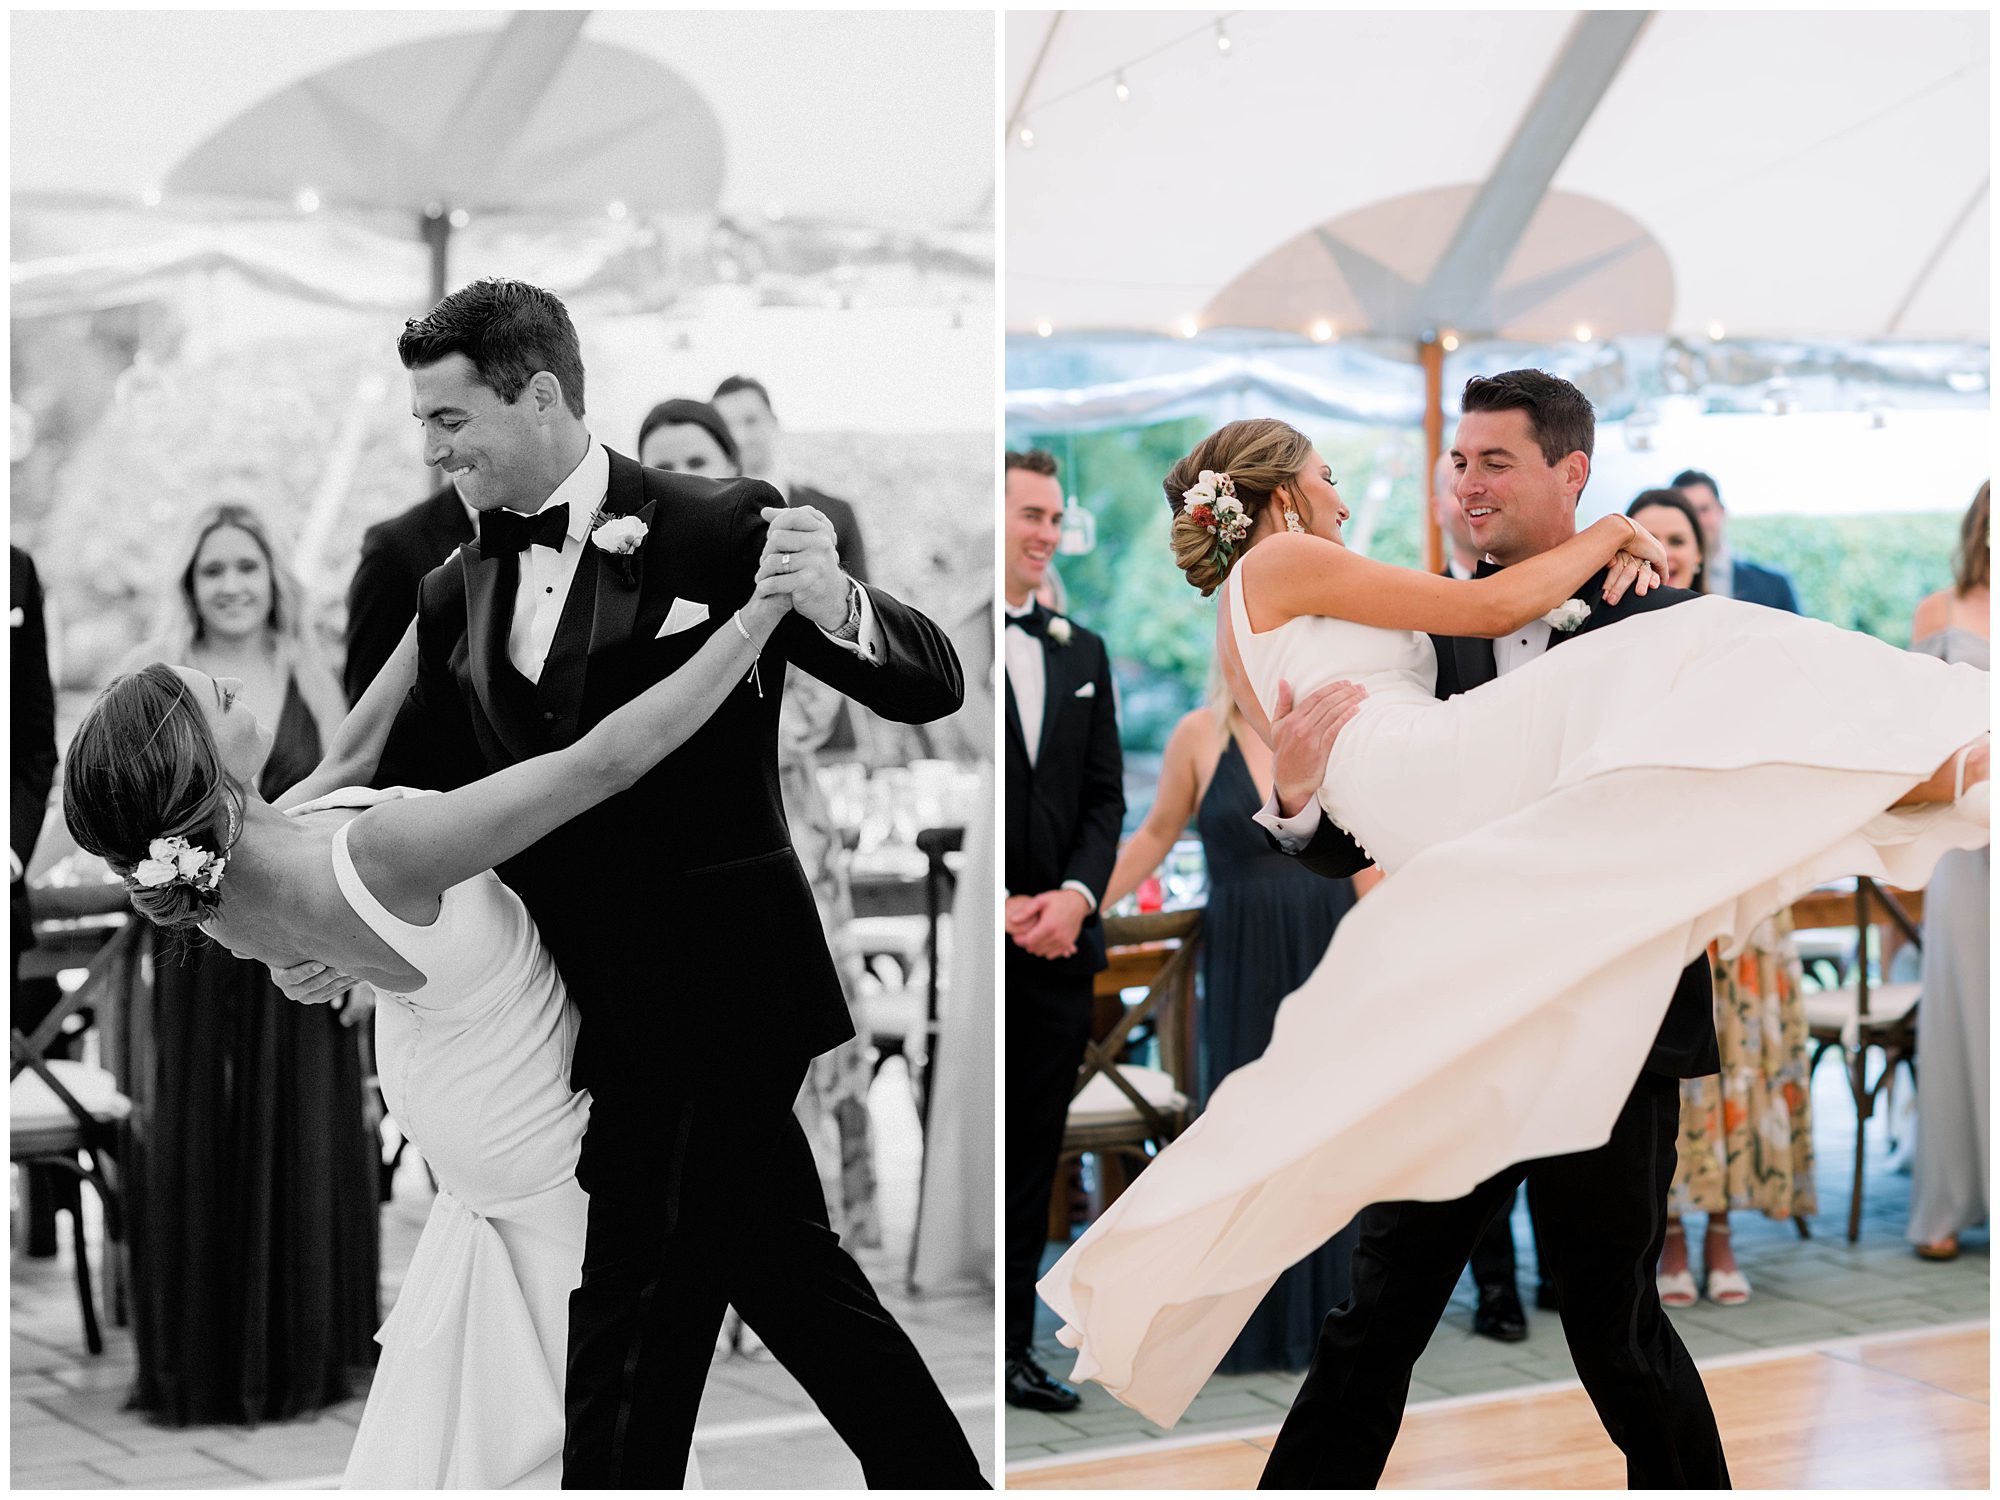 Groom twirls bride during their first dance at Wentworth By the Sea Country Club.